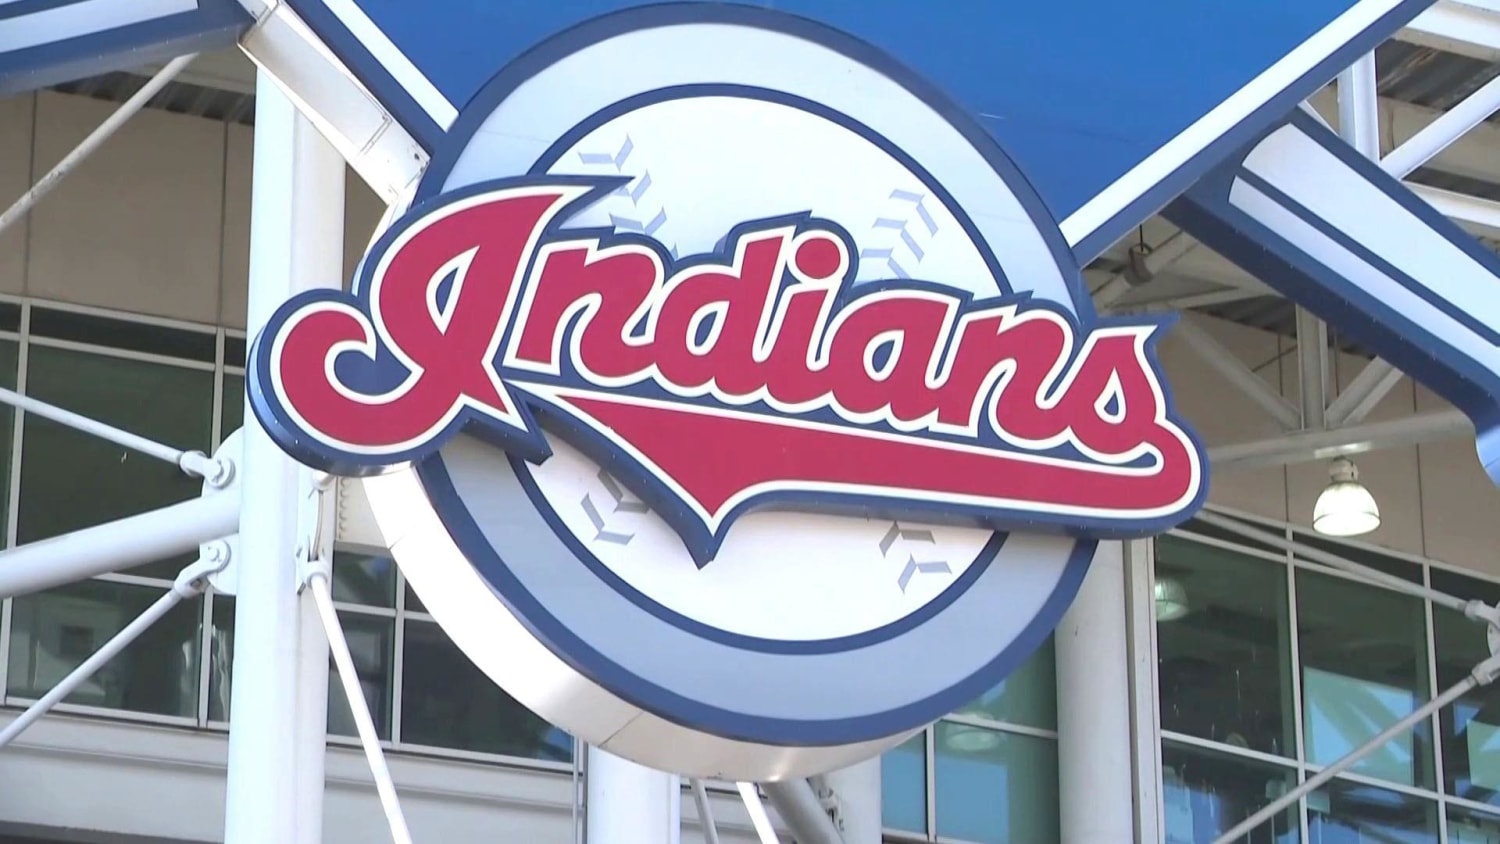 Cleveland Indians look for best path forward on team name